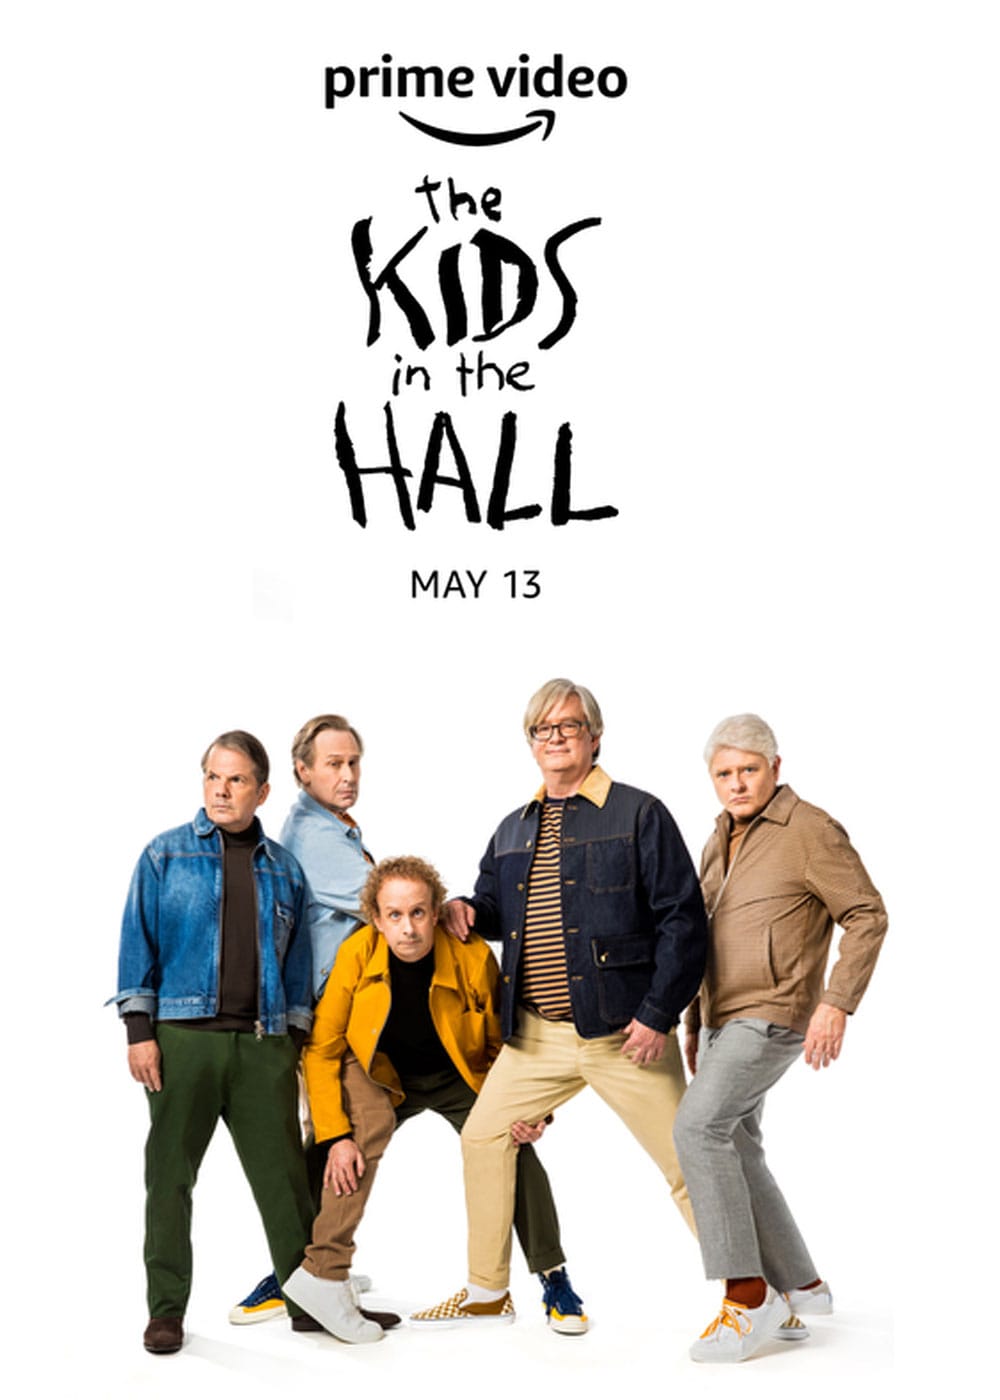 Kids in the Hall: Complete Season 2 [DVD] [Import]：Come to Store - DVD